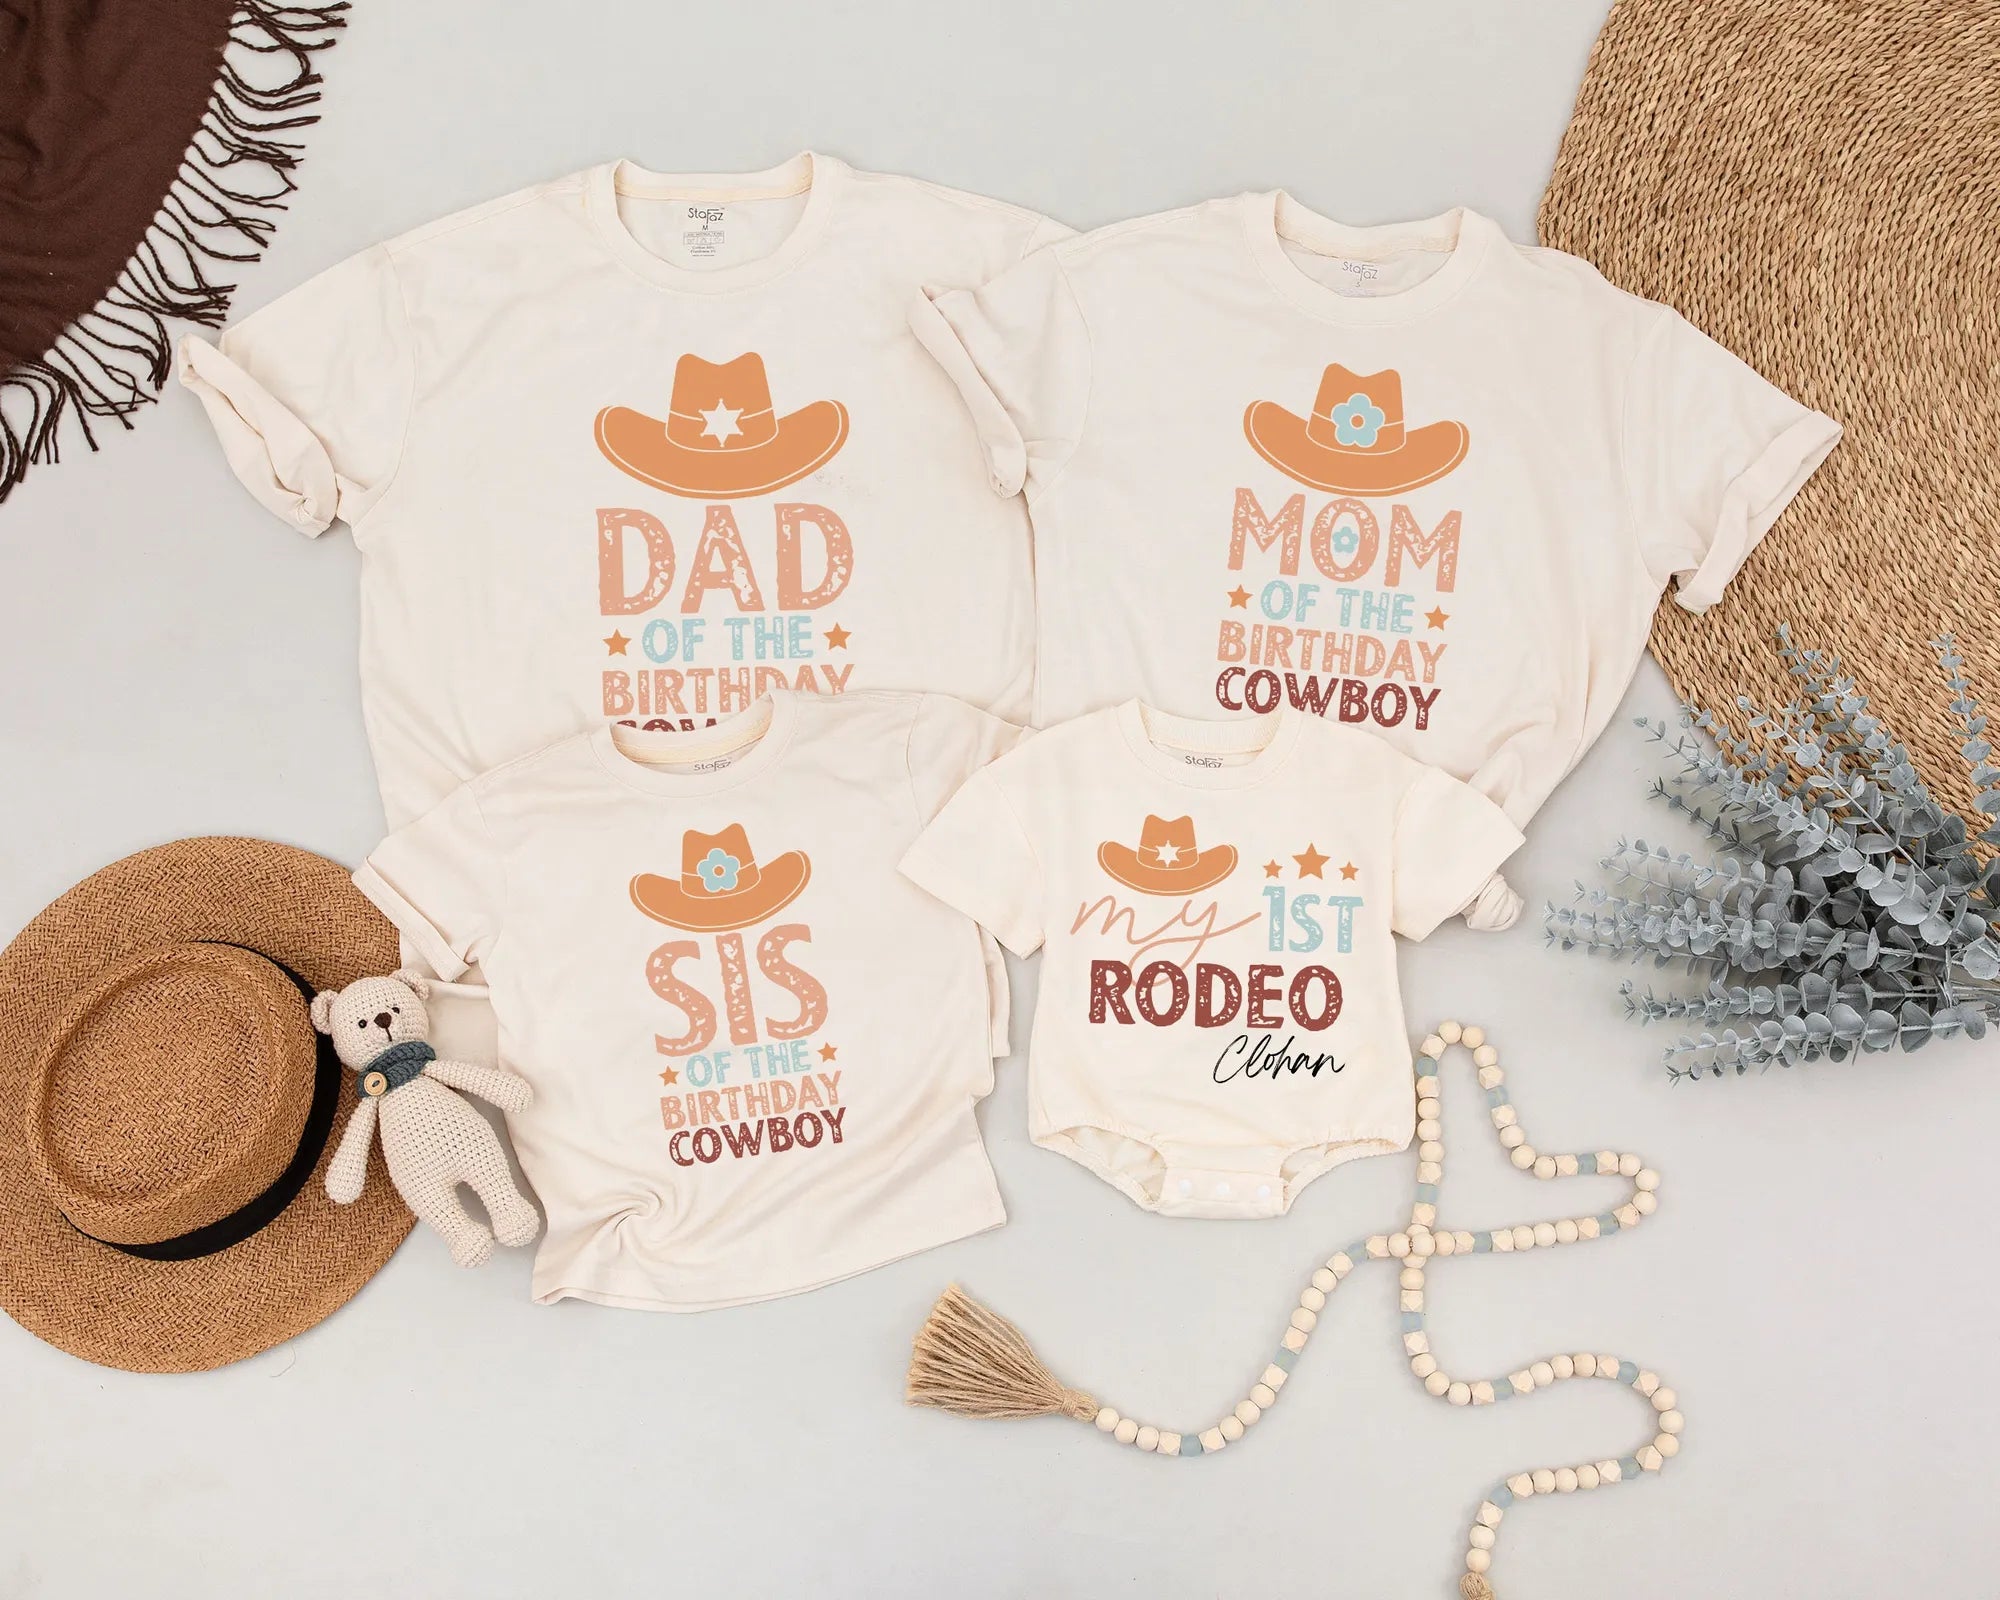 My First Rodeo Family T-Shirt: Western Birthday Baby Romper Outfit!